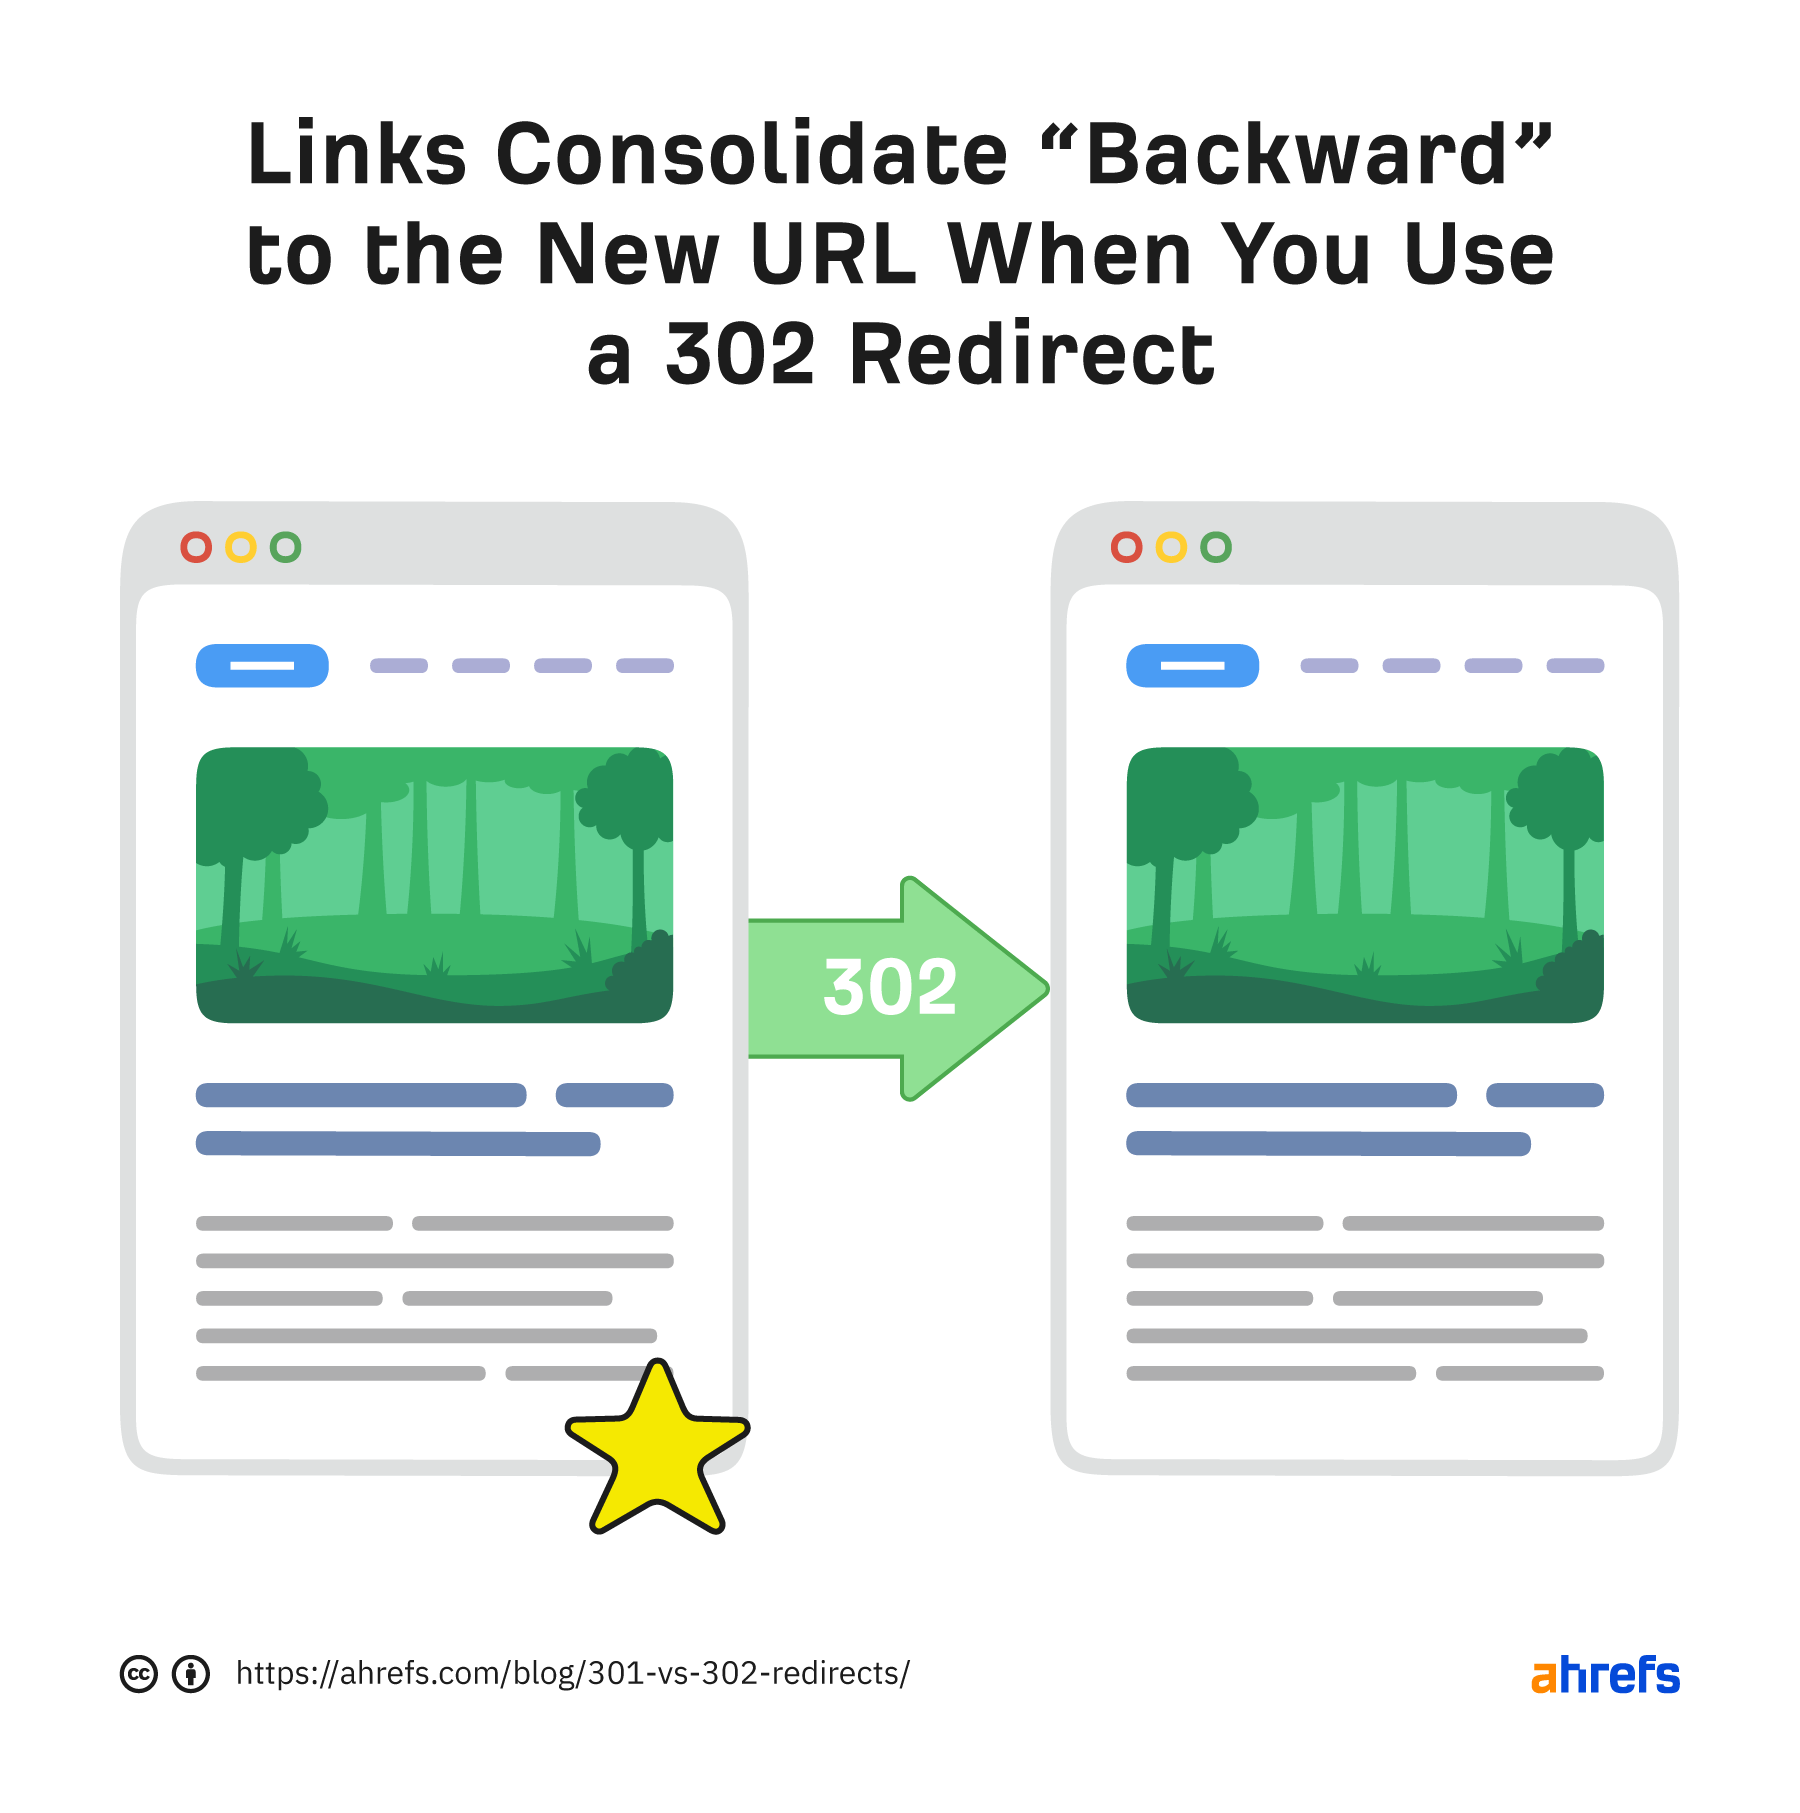 Links consolidate "backward" to the new URL when you use a 302 redirect